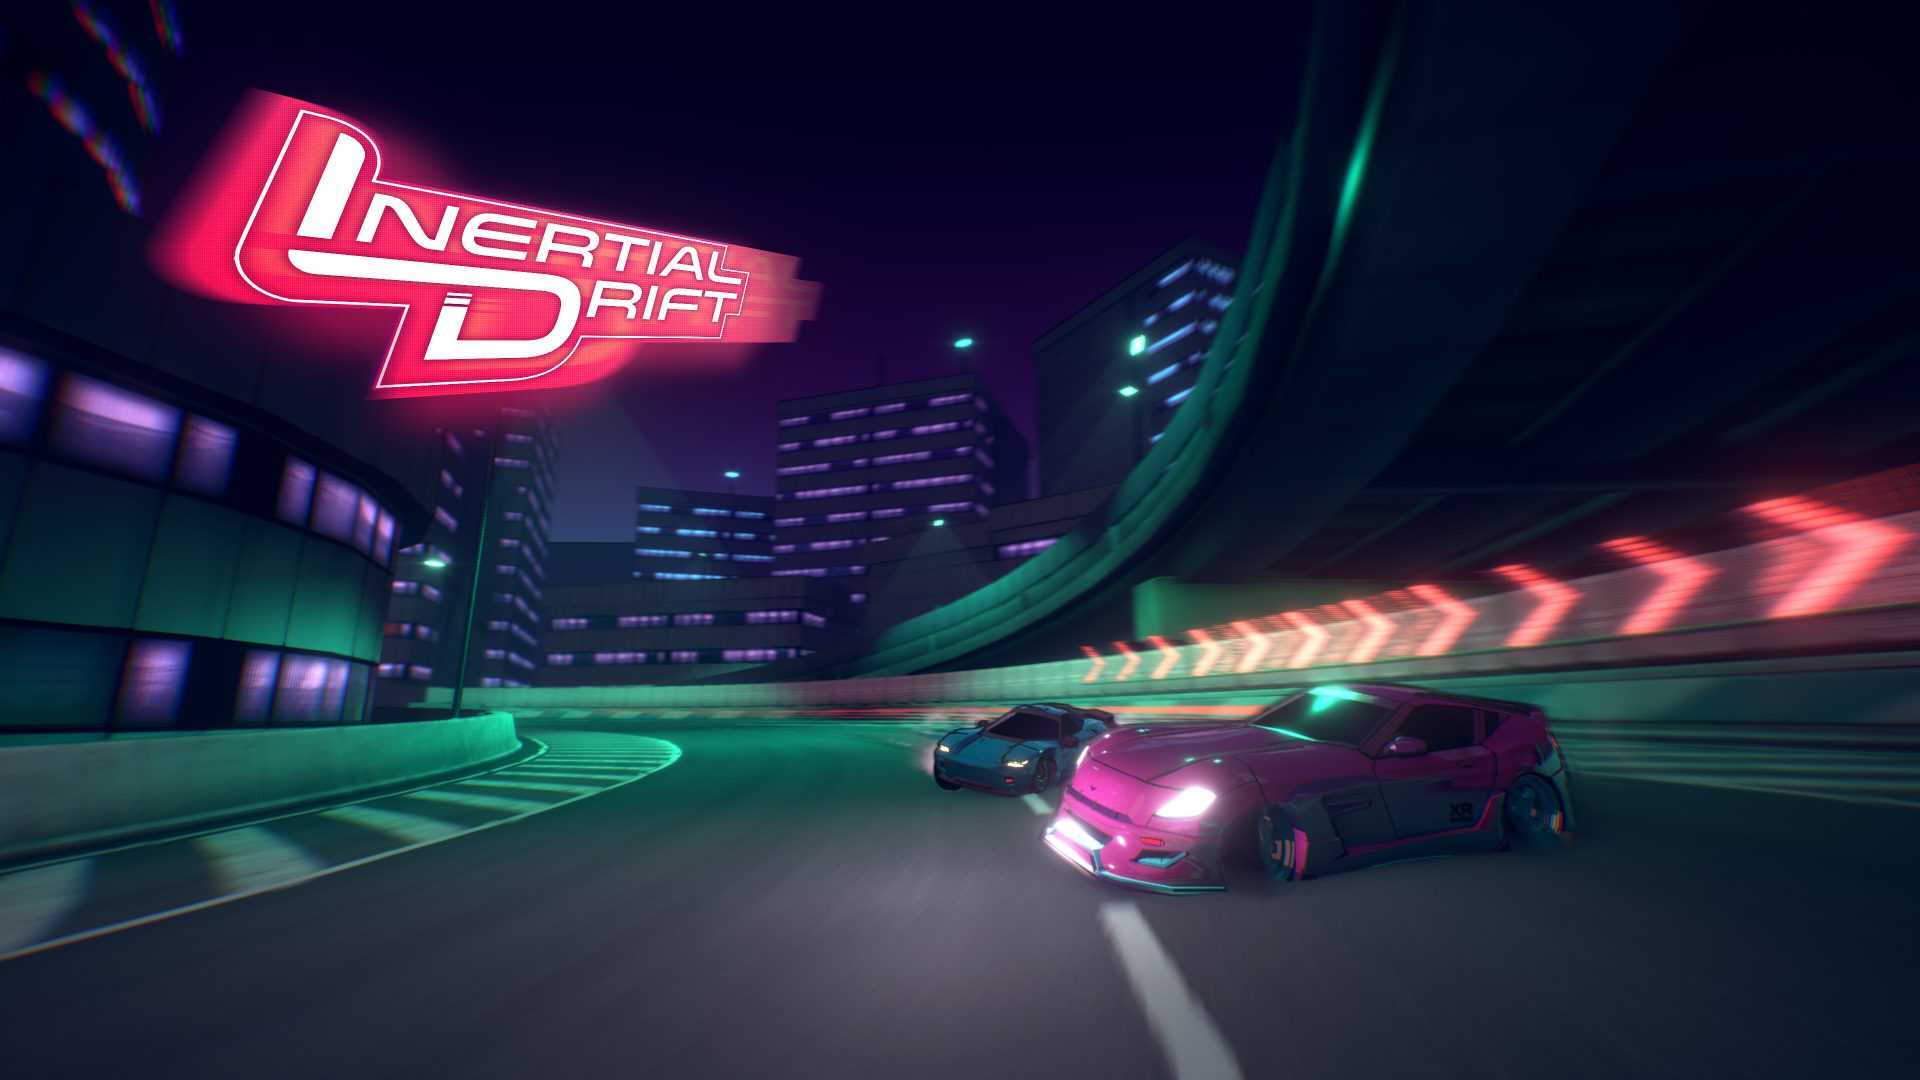 Get your rear out with Inertial Drift